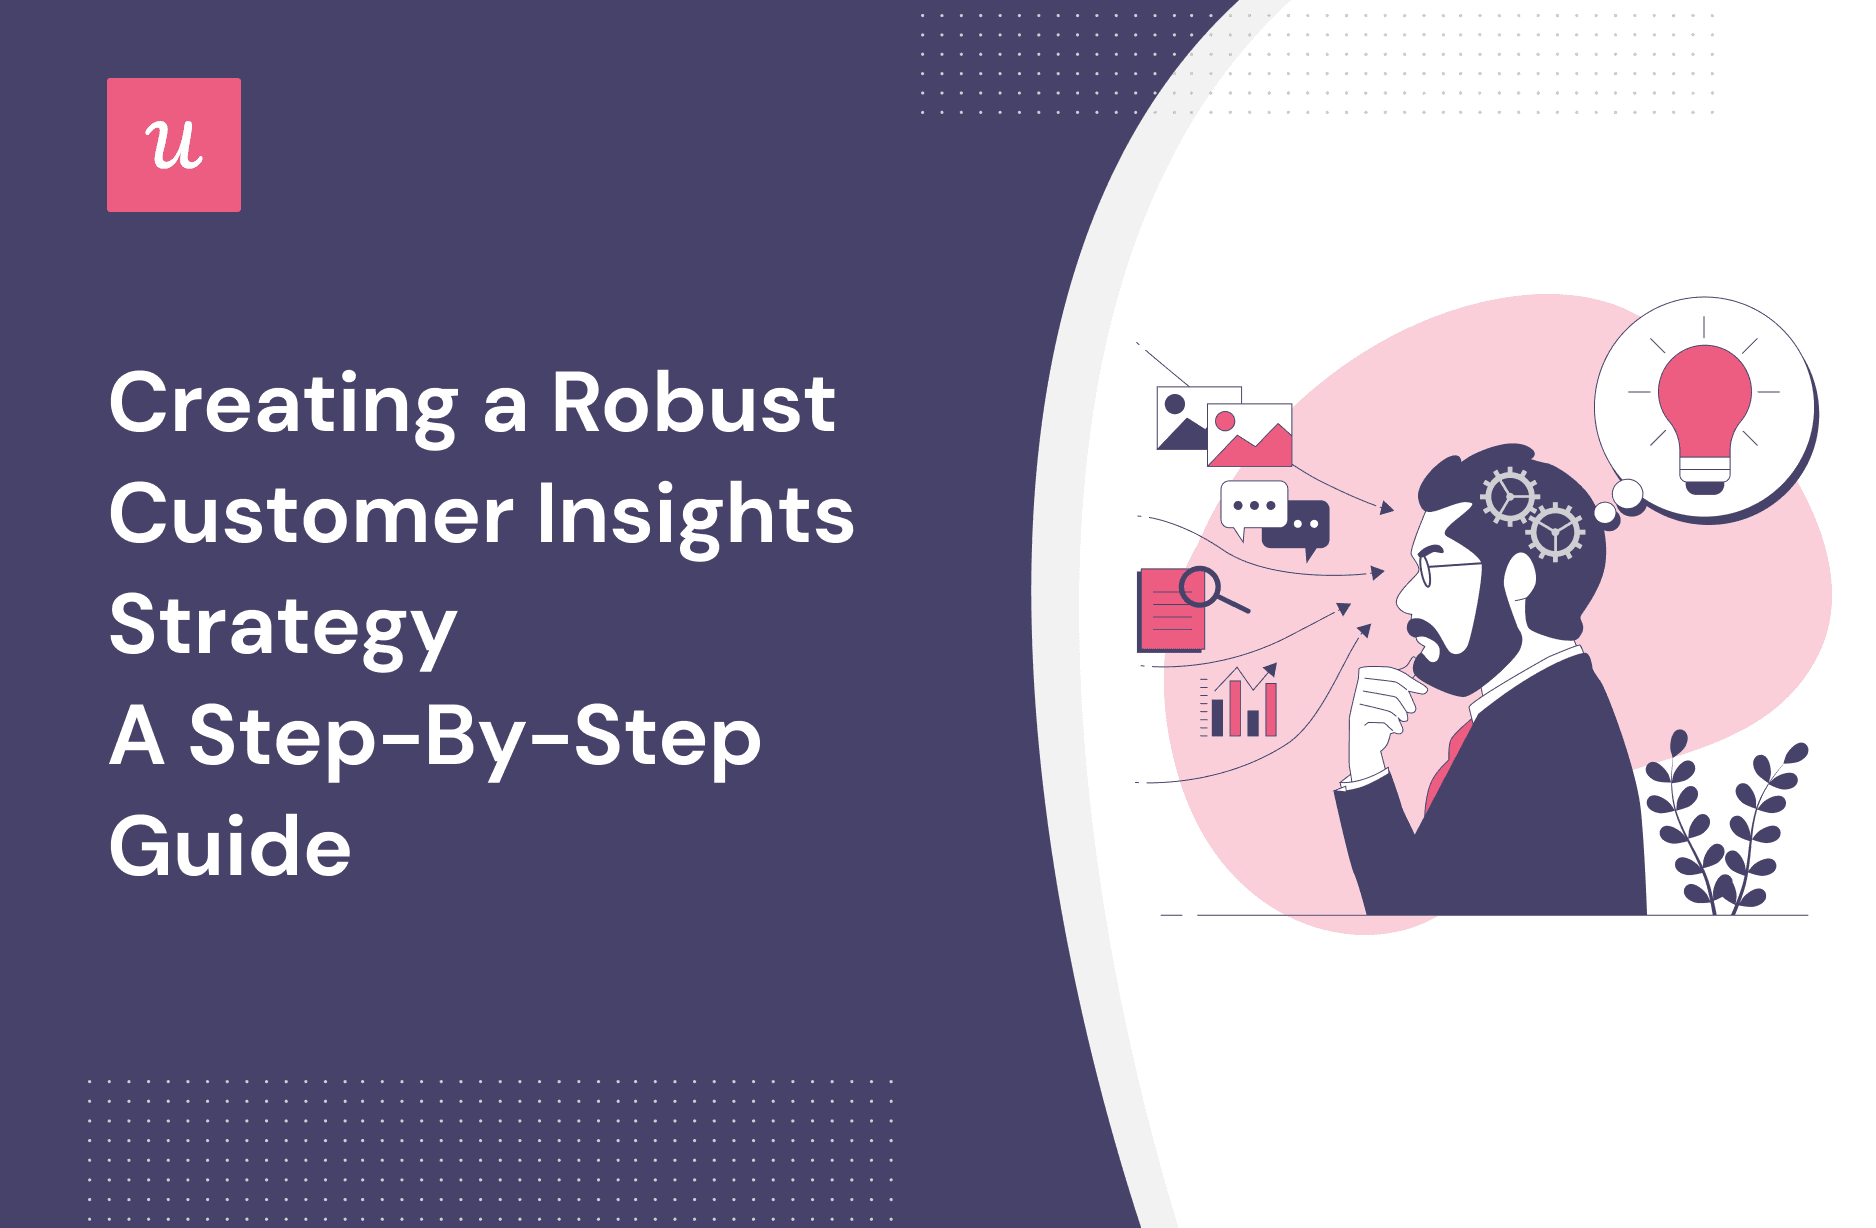 Creating a Robust Customer Insights Strategy - A Step-By-Step Guide cover